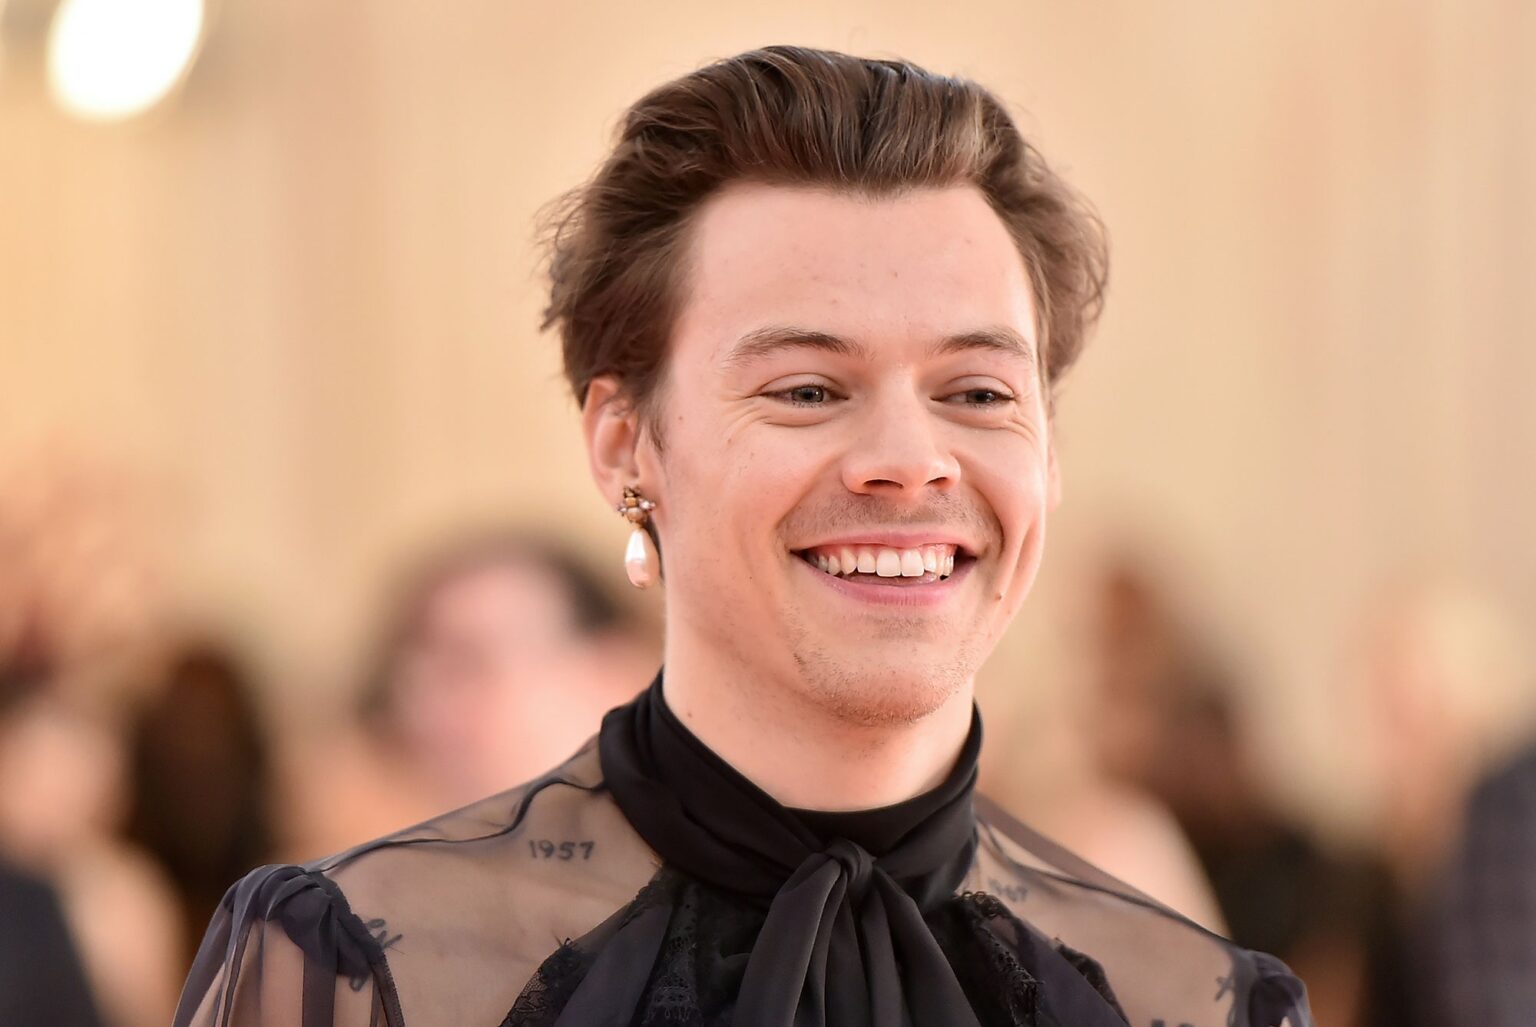 Former One Direction member Harry Styles is lighting up Twitter for wearing a dress. Here's how Harry Styles is breaking gender stereotypes.